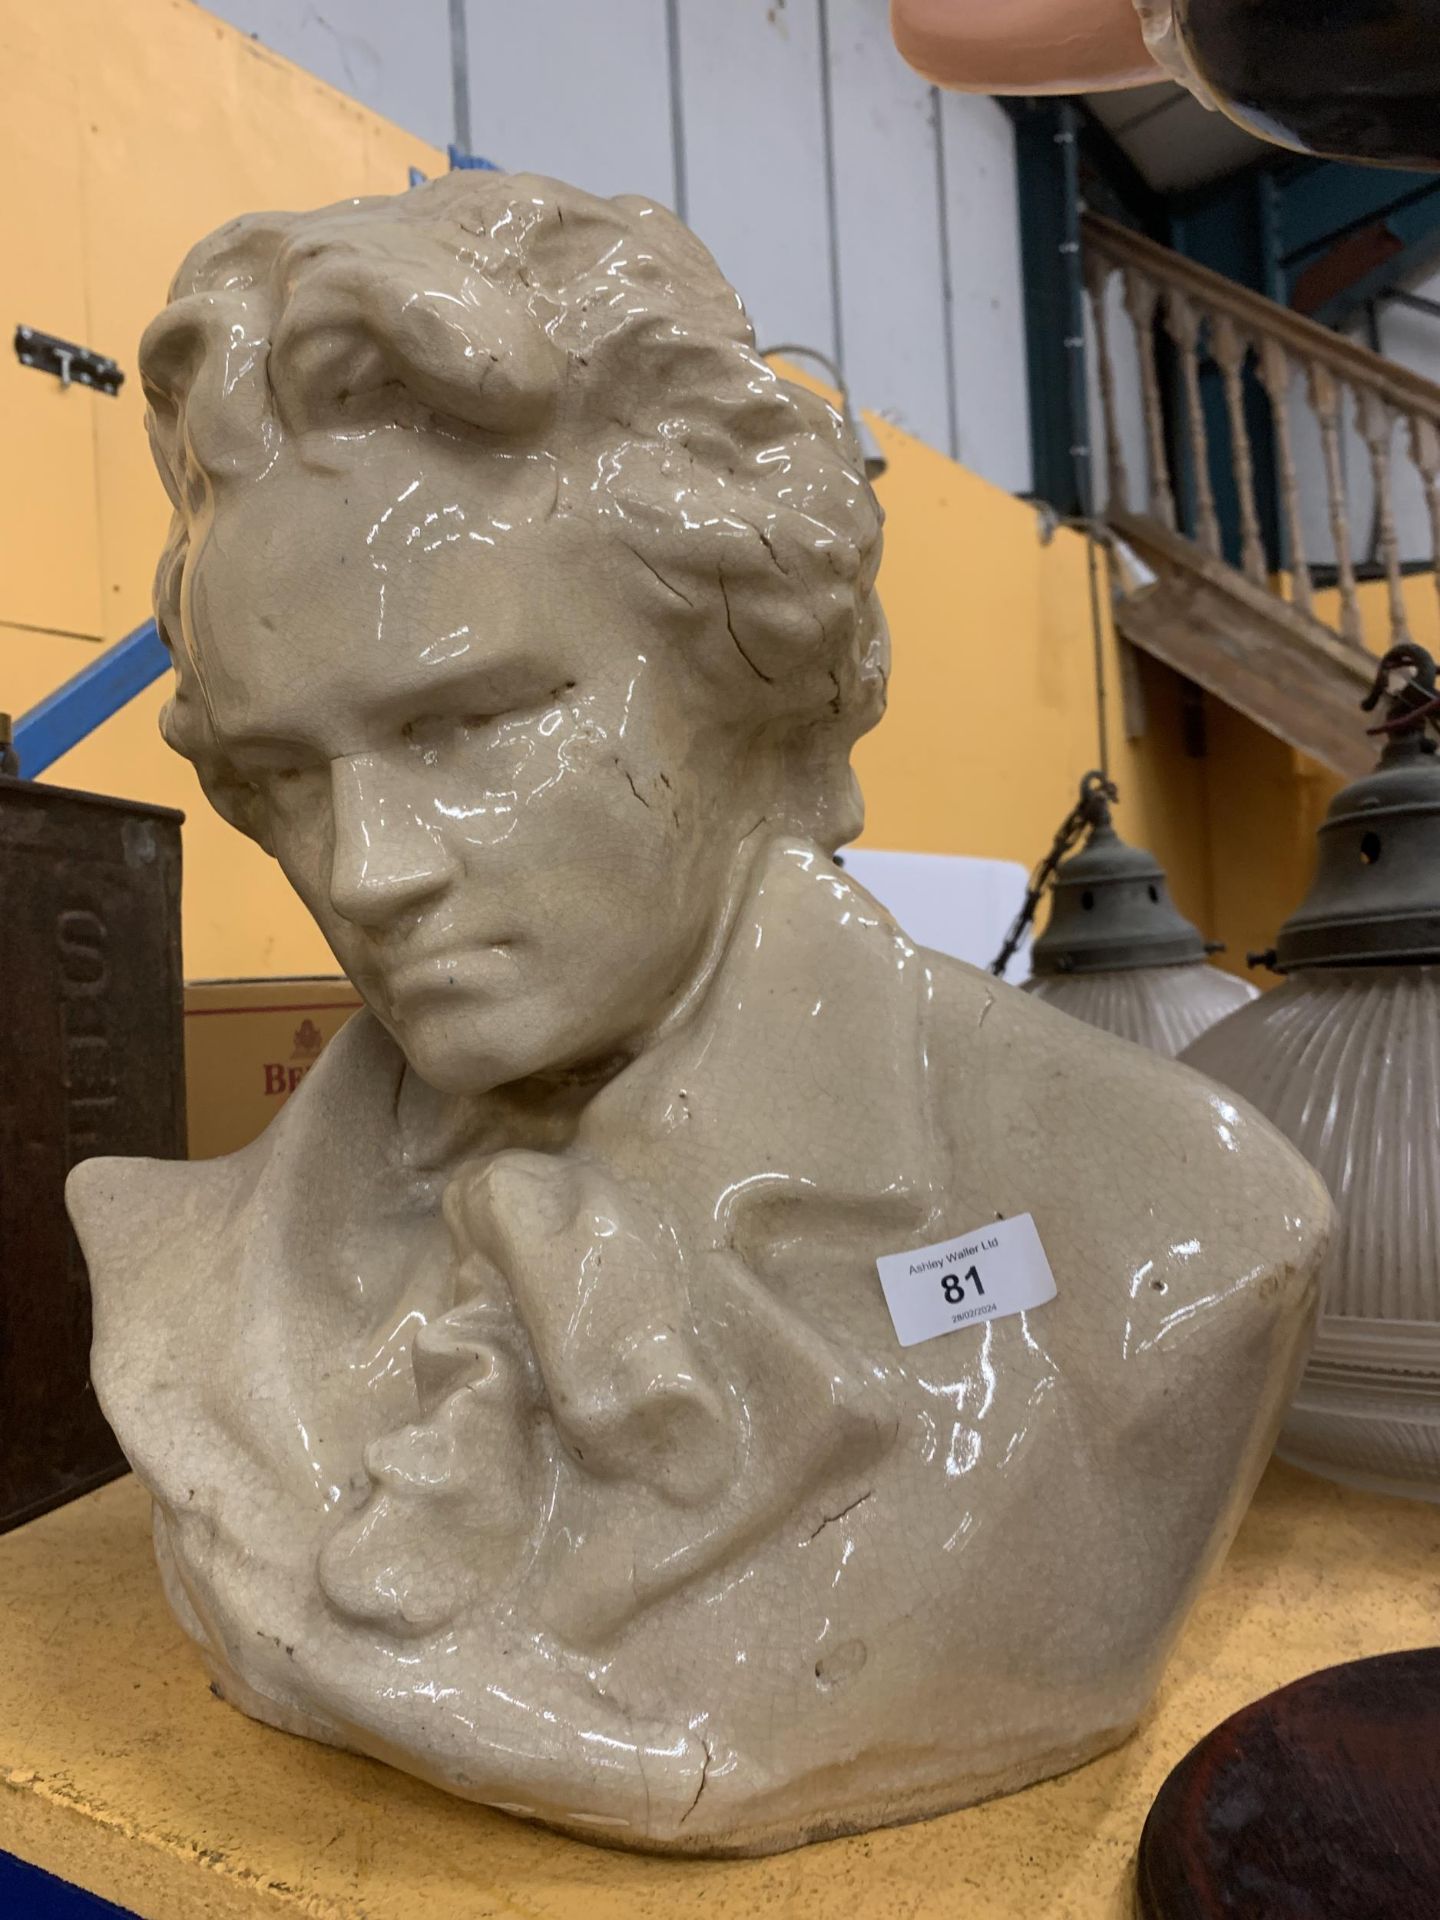 A VINTAGE LARGE HEAVY CERAMIC BUST OF BEETHOVEN - Image 3 of 3